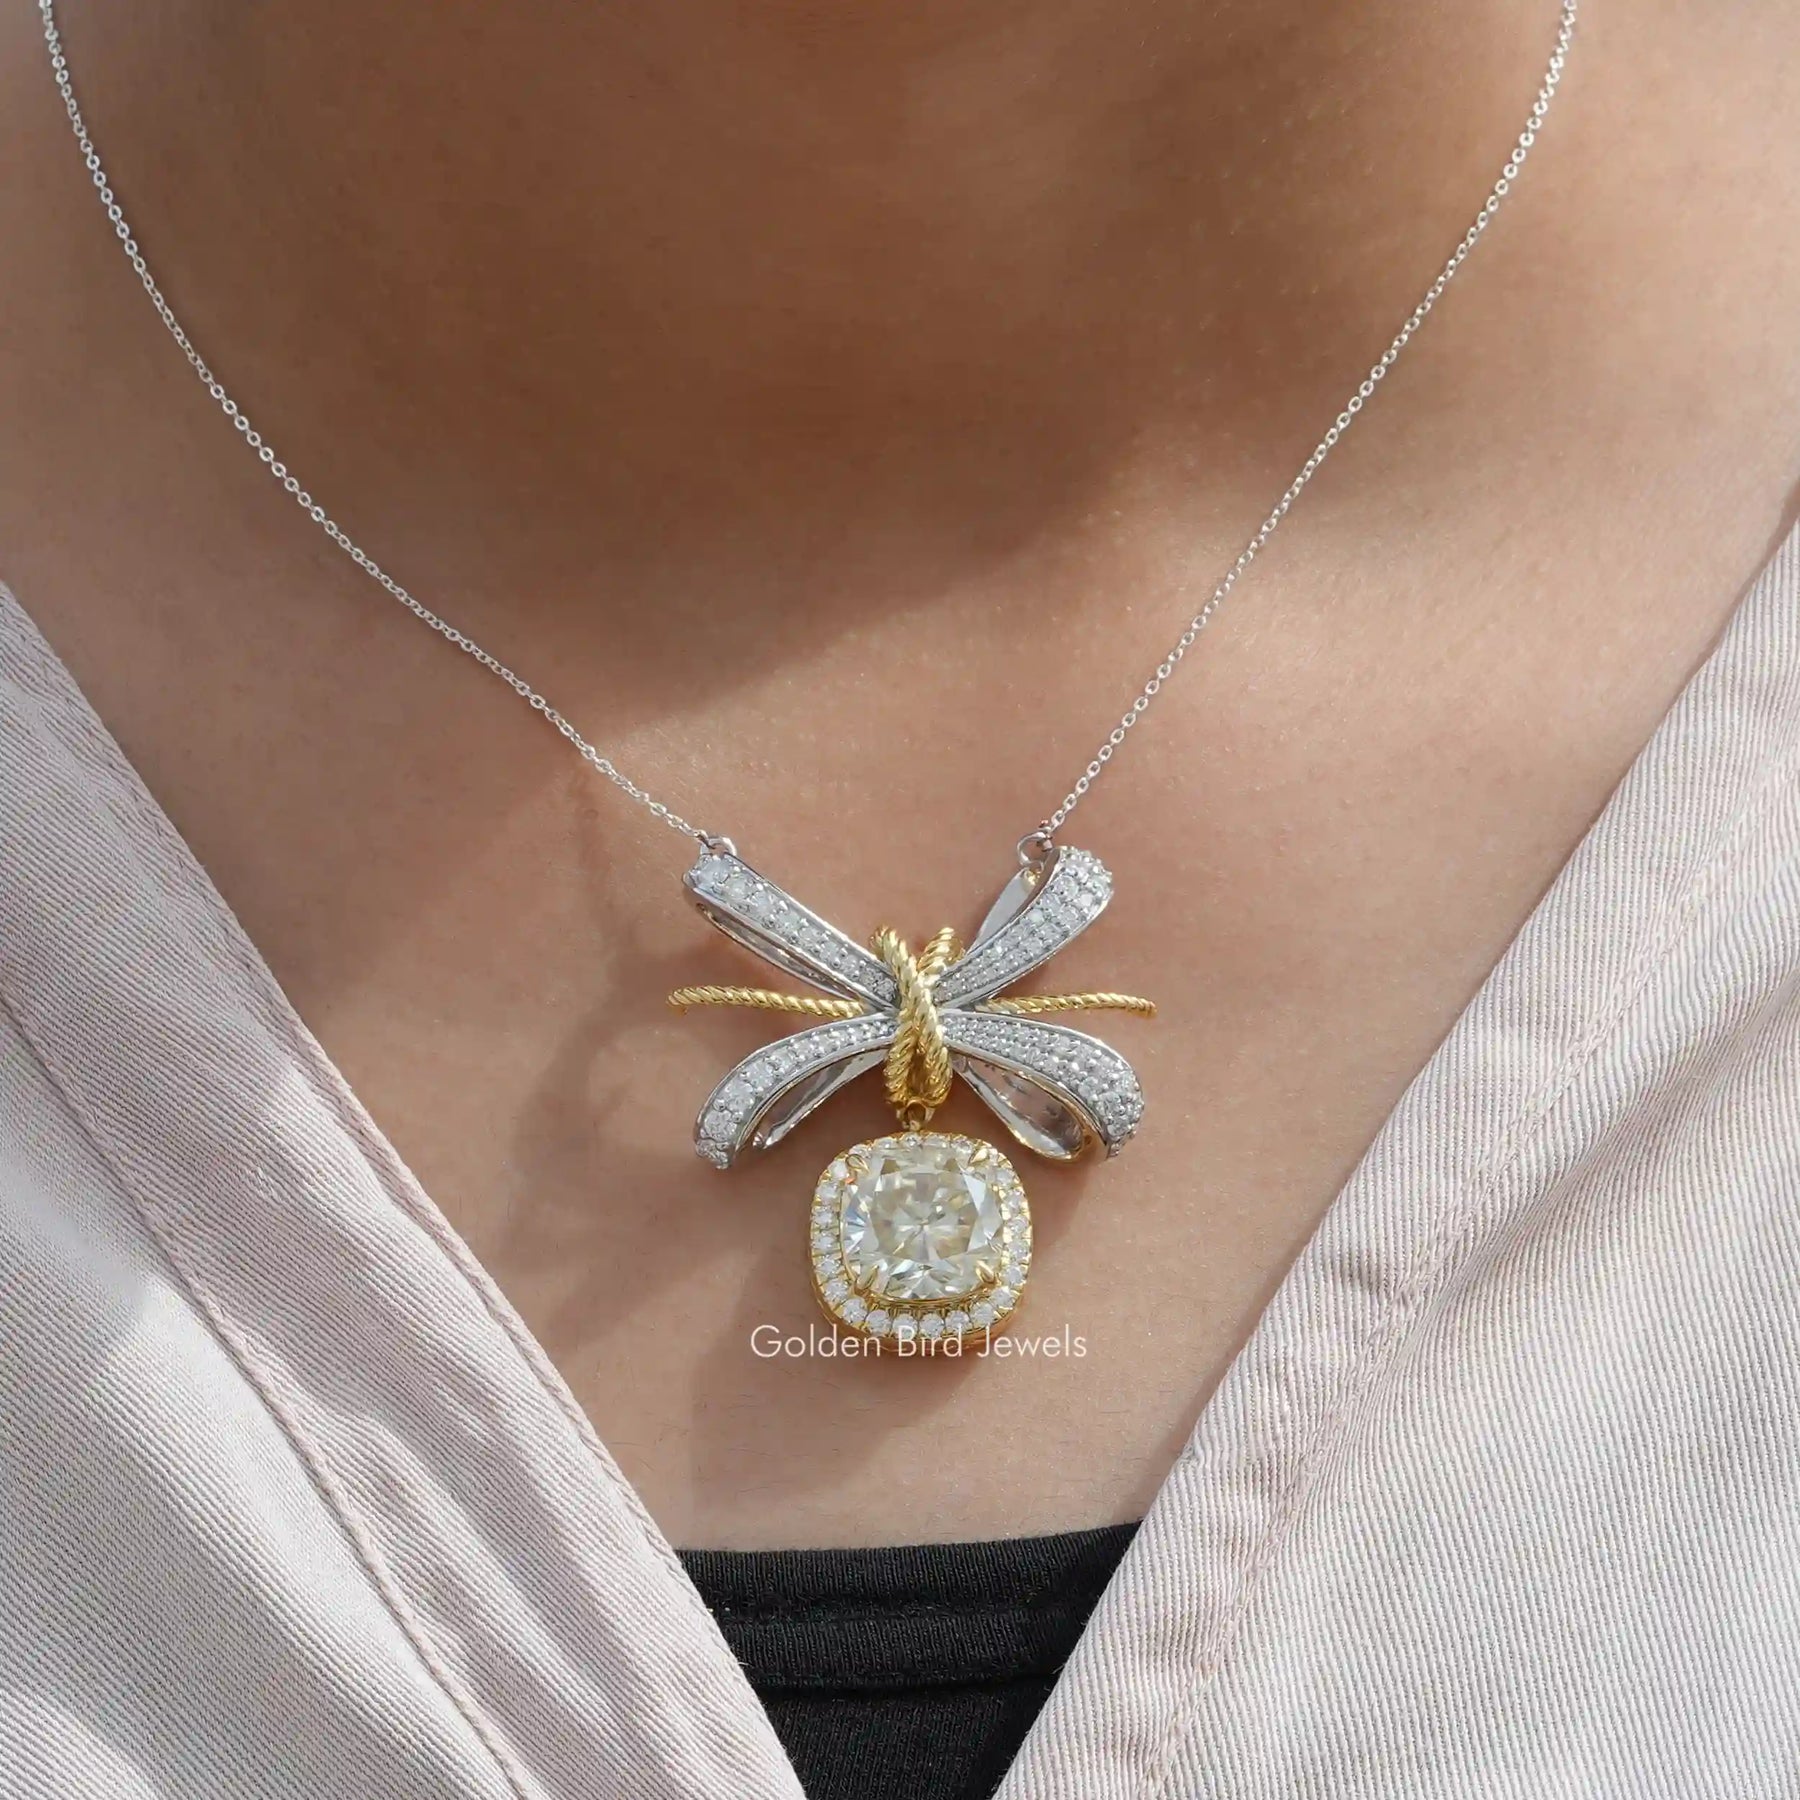 [In neck front view of cushion cut halo pendant made of yellow and white gold]-[Golden Bird Jewels]